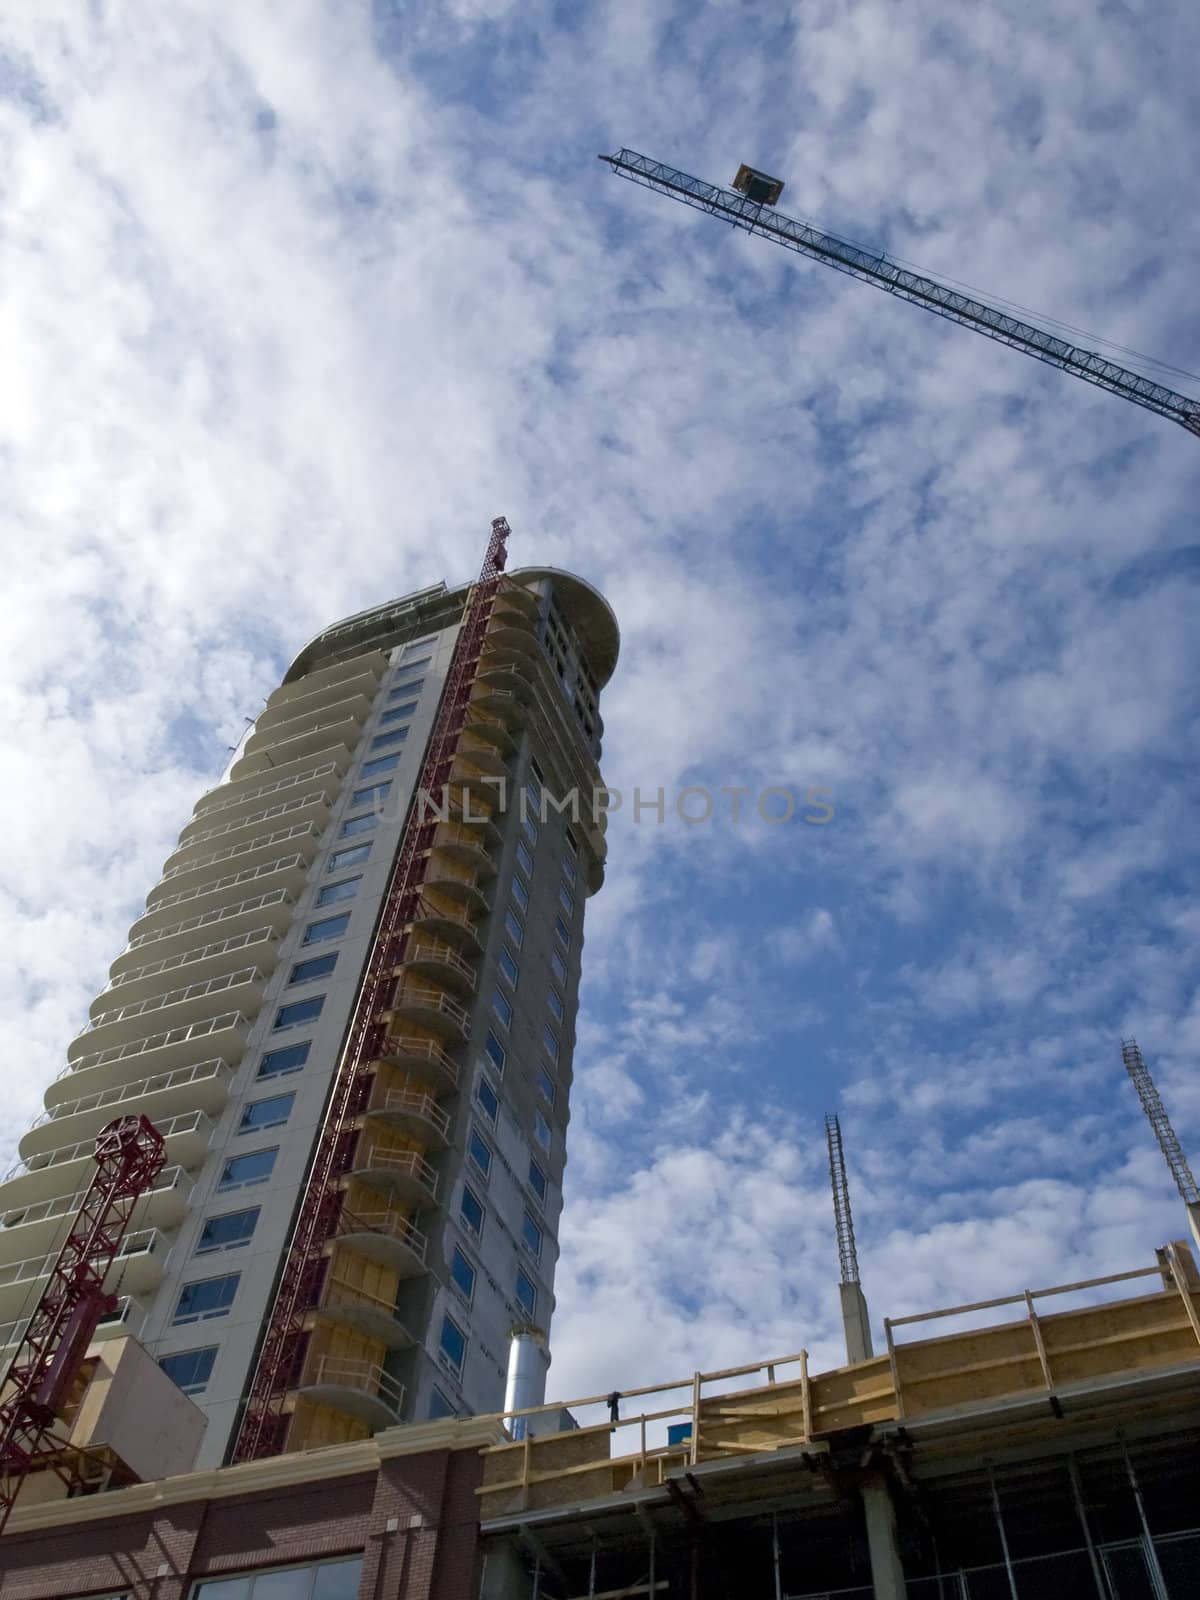 New Condo Construction by watamyr